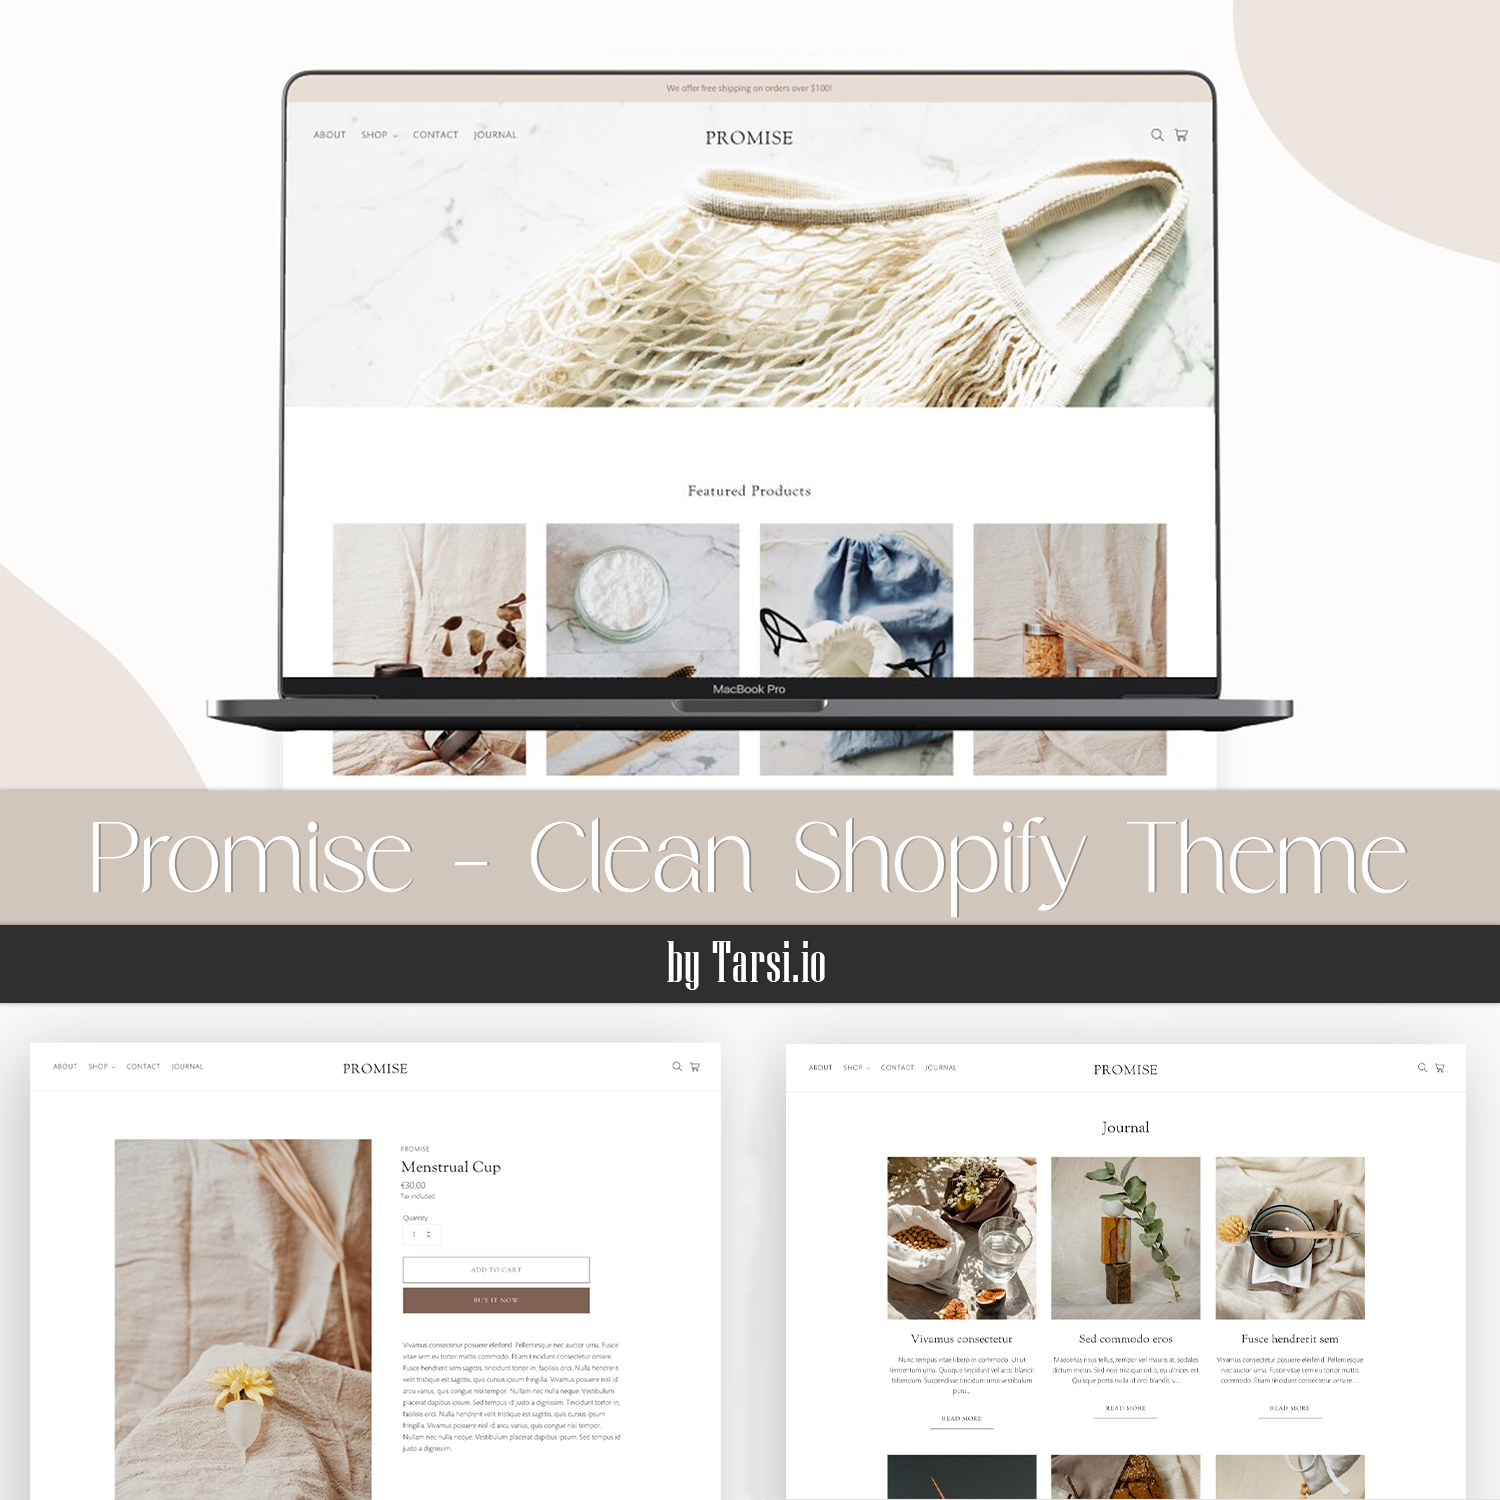 Image collection of colorful shopify theme pages.